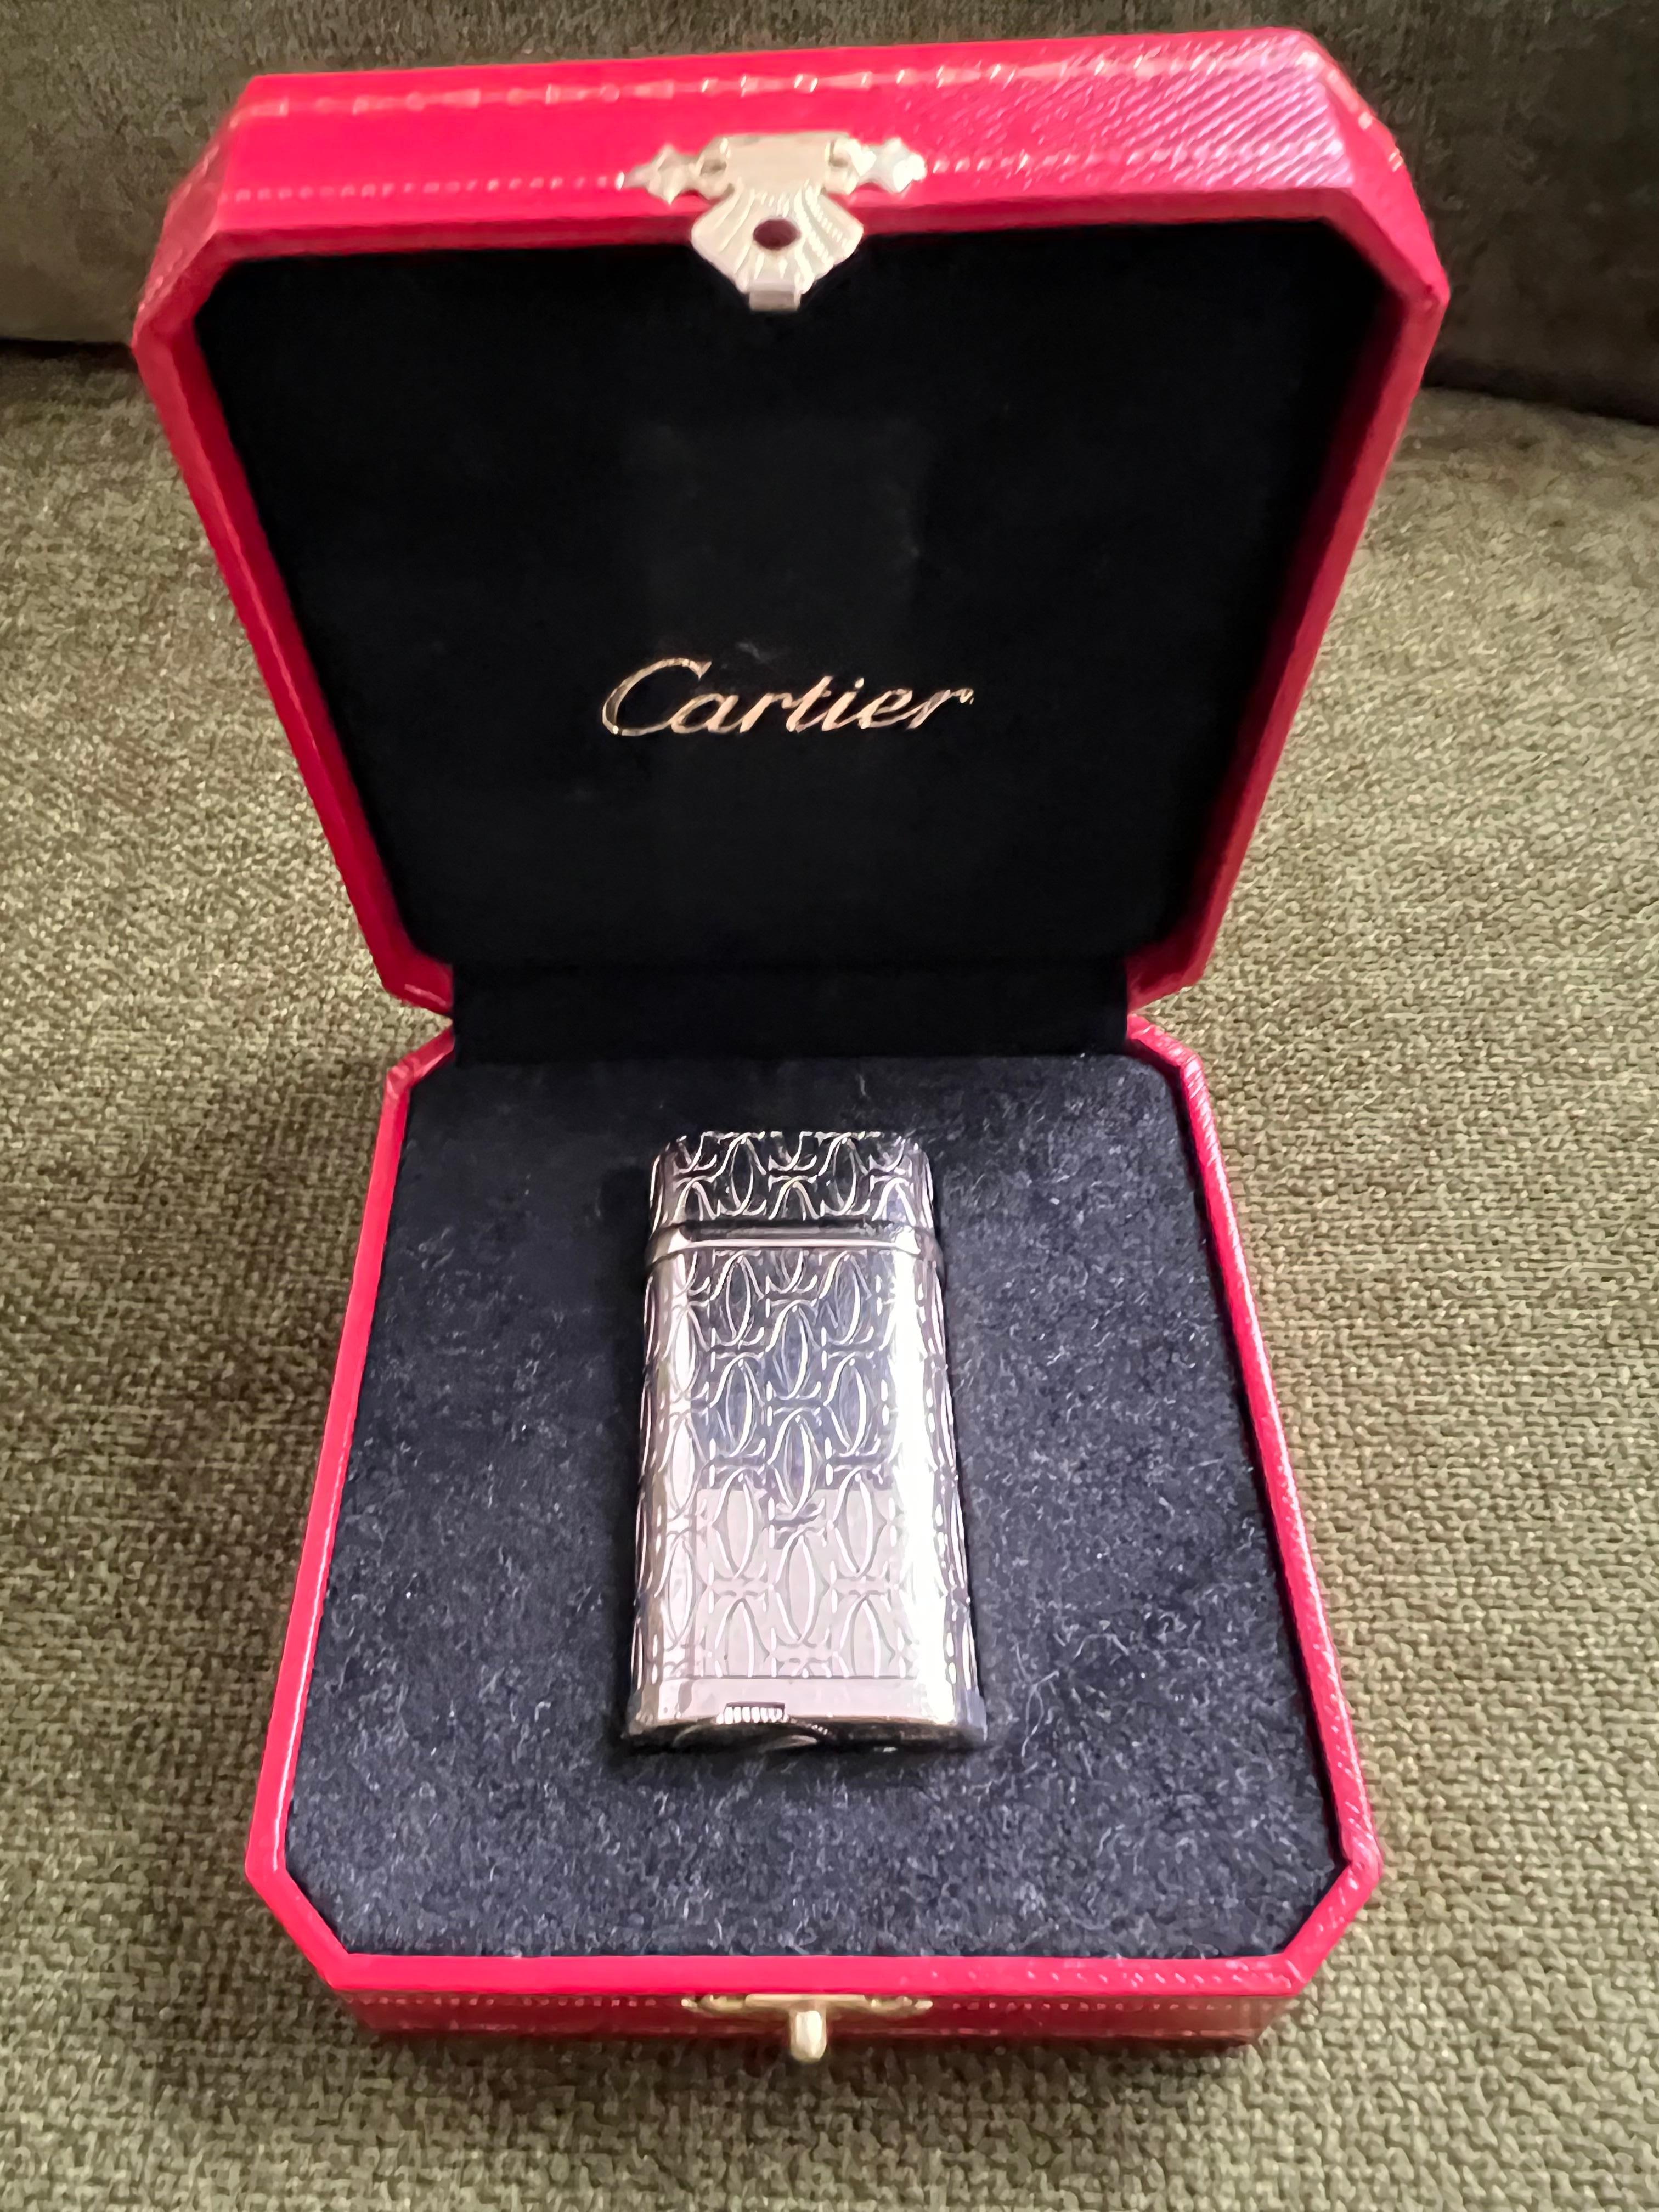 Cartier Lighter C de Cartier Silver and Palladium Finish 
Comes with original Cartier case 
In mint exterior and working condition 
Circa 2000
In great condition 
The lighter ignites, sparks and flames